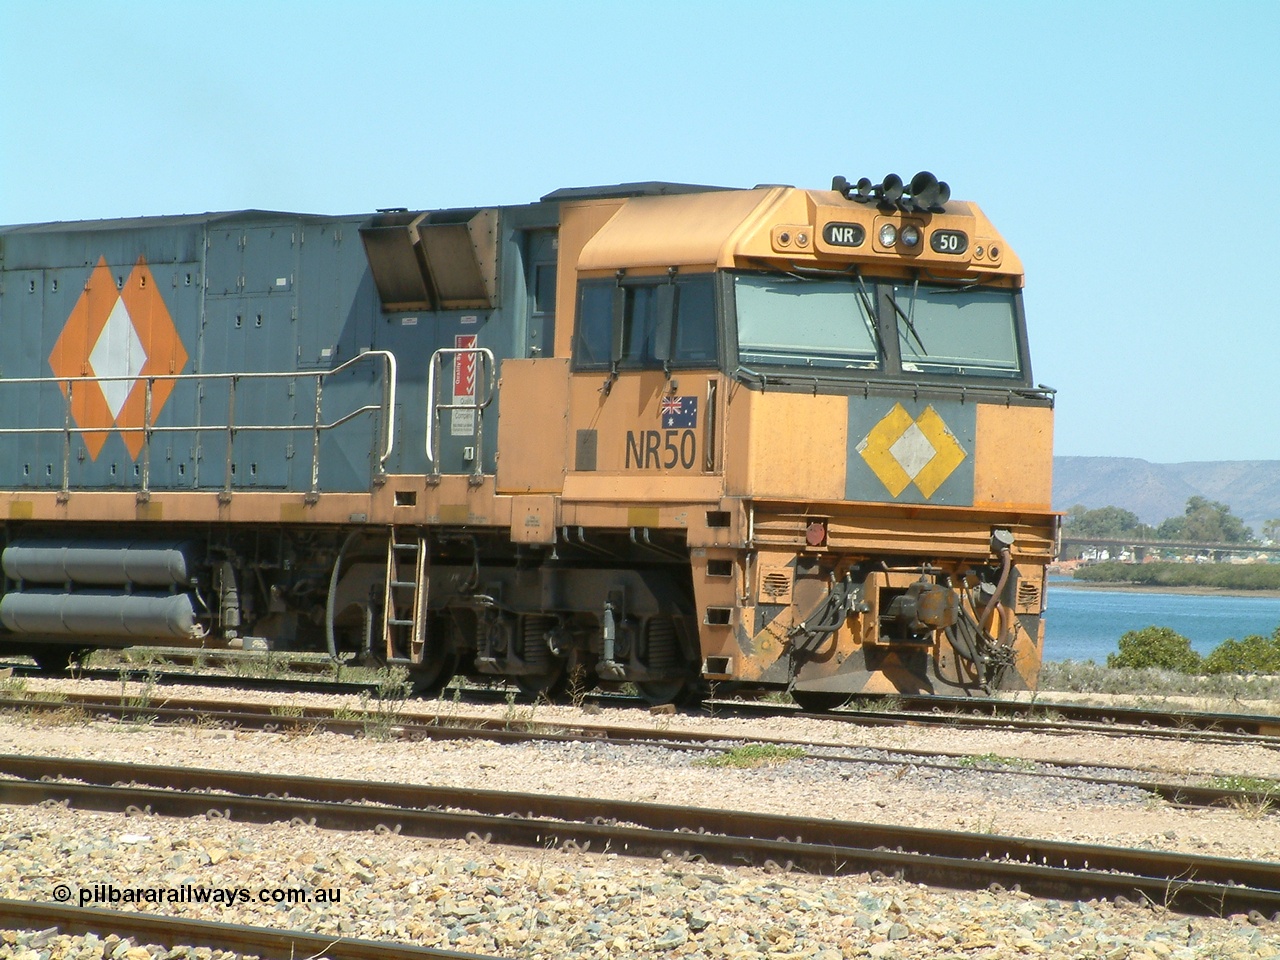 030404 125115
Port Augusta Spencer Junction yard, a Perth bound intermodal awaits departure time on 13 Road behind National Rail NR class units built by Goninan as GE Cv40-9i models, NR 50 serial 7250-08 / 97-252. 4th April 2003.
Keywords: NR-class;NR50;Goninan;GE;Cv40-9i;7250-08/97-252;